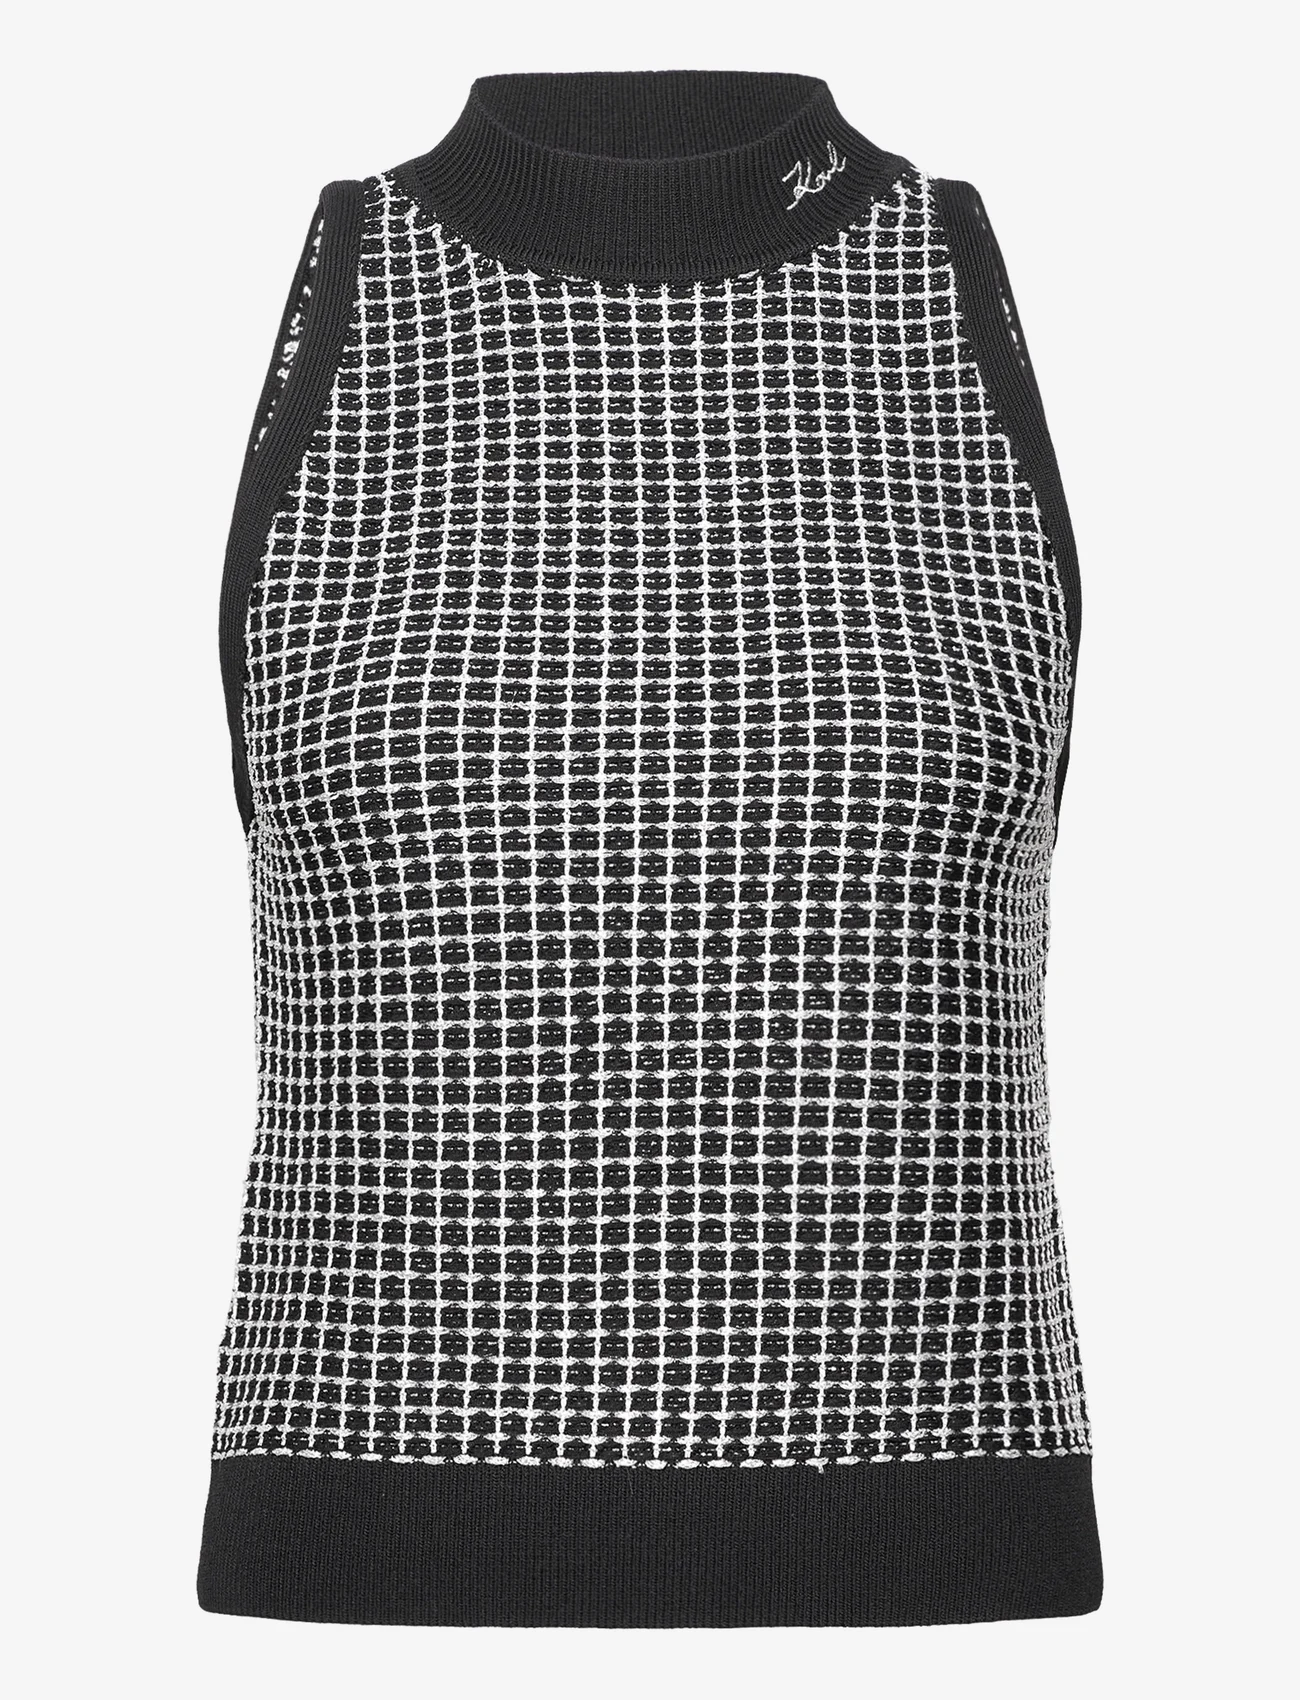 Karl Lagerfeld - sleeveless boucle knit top - knitted vests - black/silver - 0